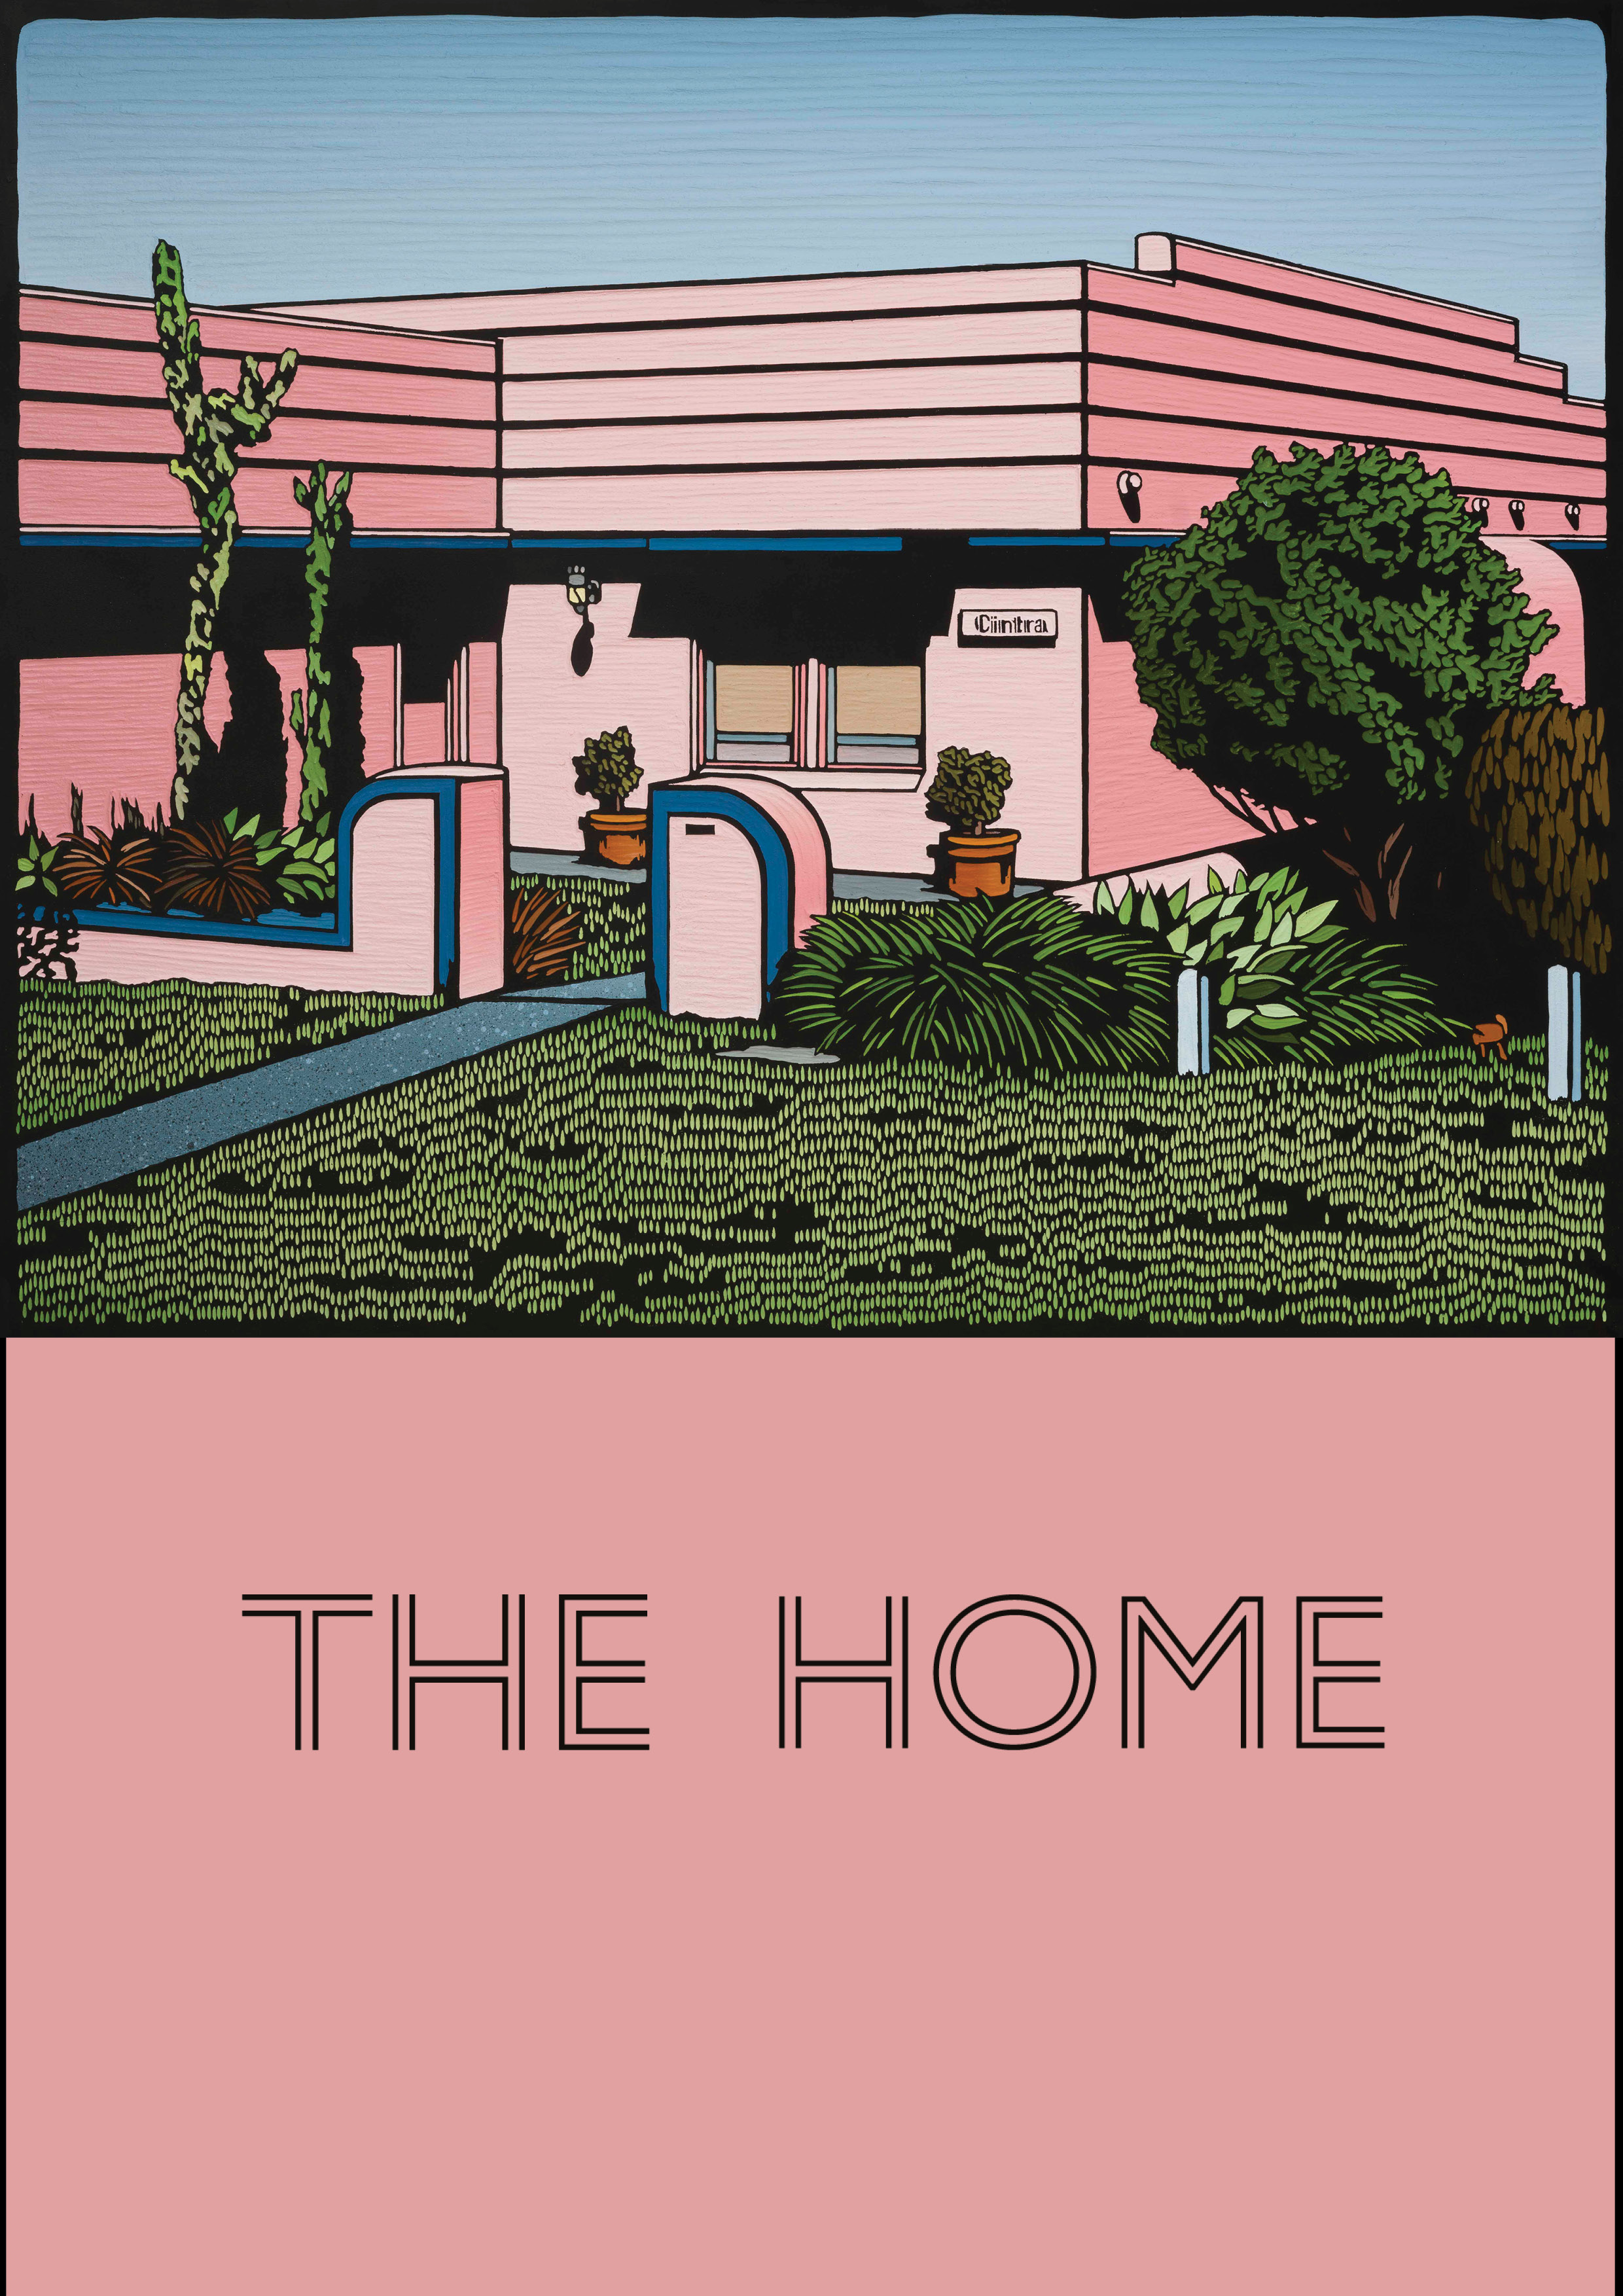 The cover of an exhibition catalogue featuring a work by artist Christopher Zanko. The work is a painted wood carving depicting an art deco home that is a light pink colour, the lawn infront of the house is a deep green colour and there is a tree to the right of the house and a cactus to the left, the sky is blue. The lowed half of the page is the same pink as the house and features the exhibition title 'The Home' in all capital lerrers in an art deco style text with heavy black line.